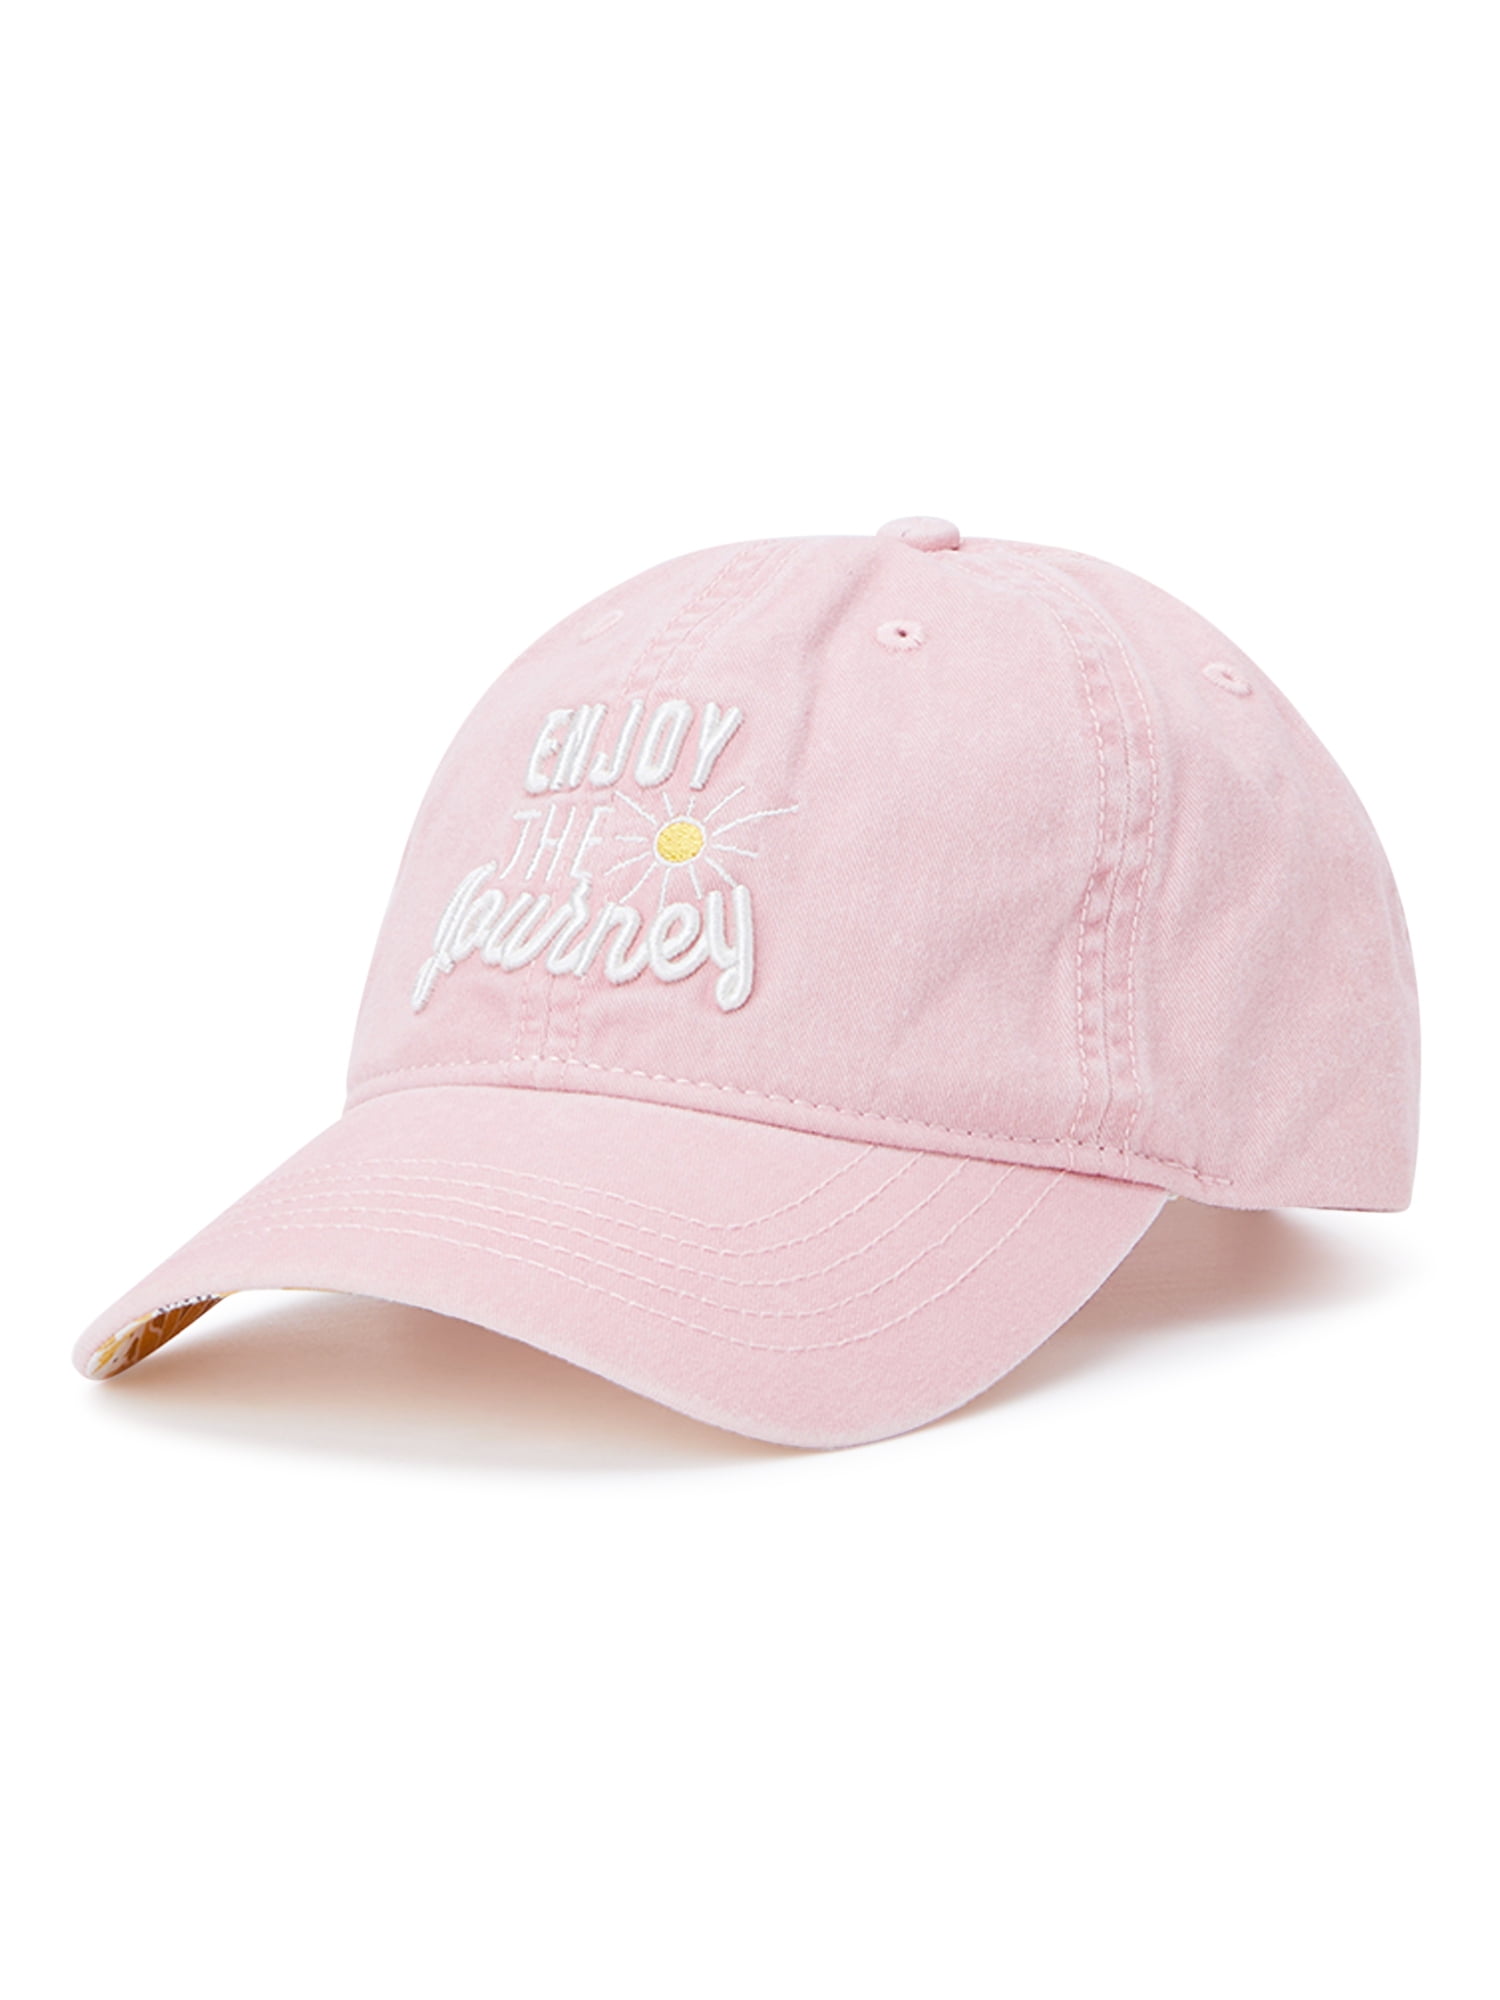 Hat Dusty Journey Embroidered Enjoy the Cotton Time Rose and Tru Washed Baseball Women\'s Twill